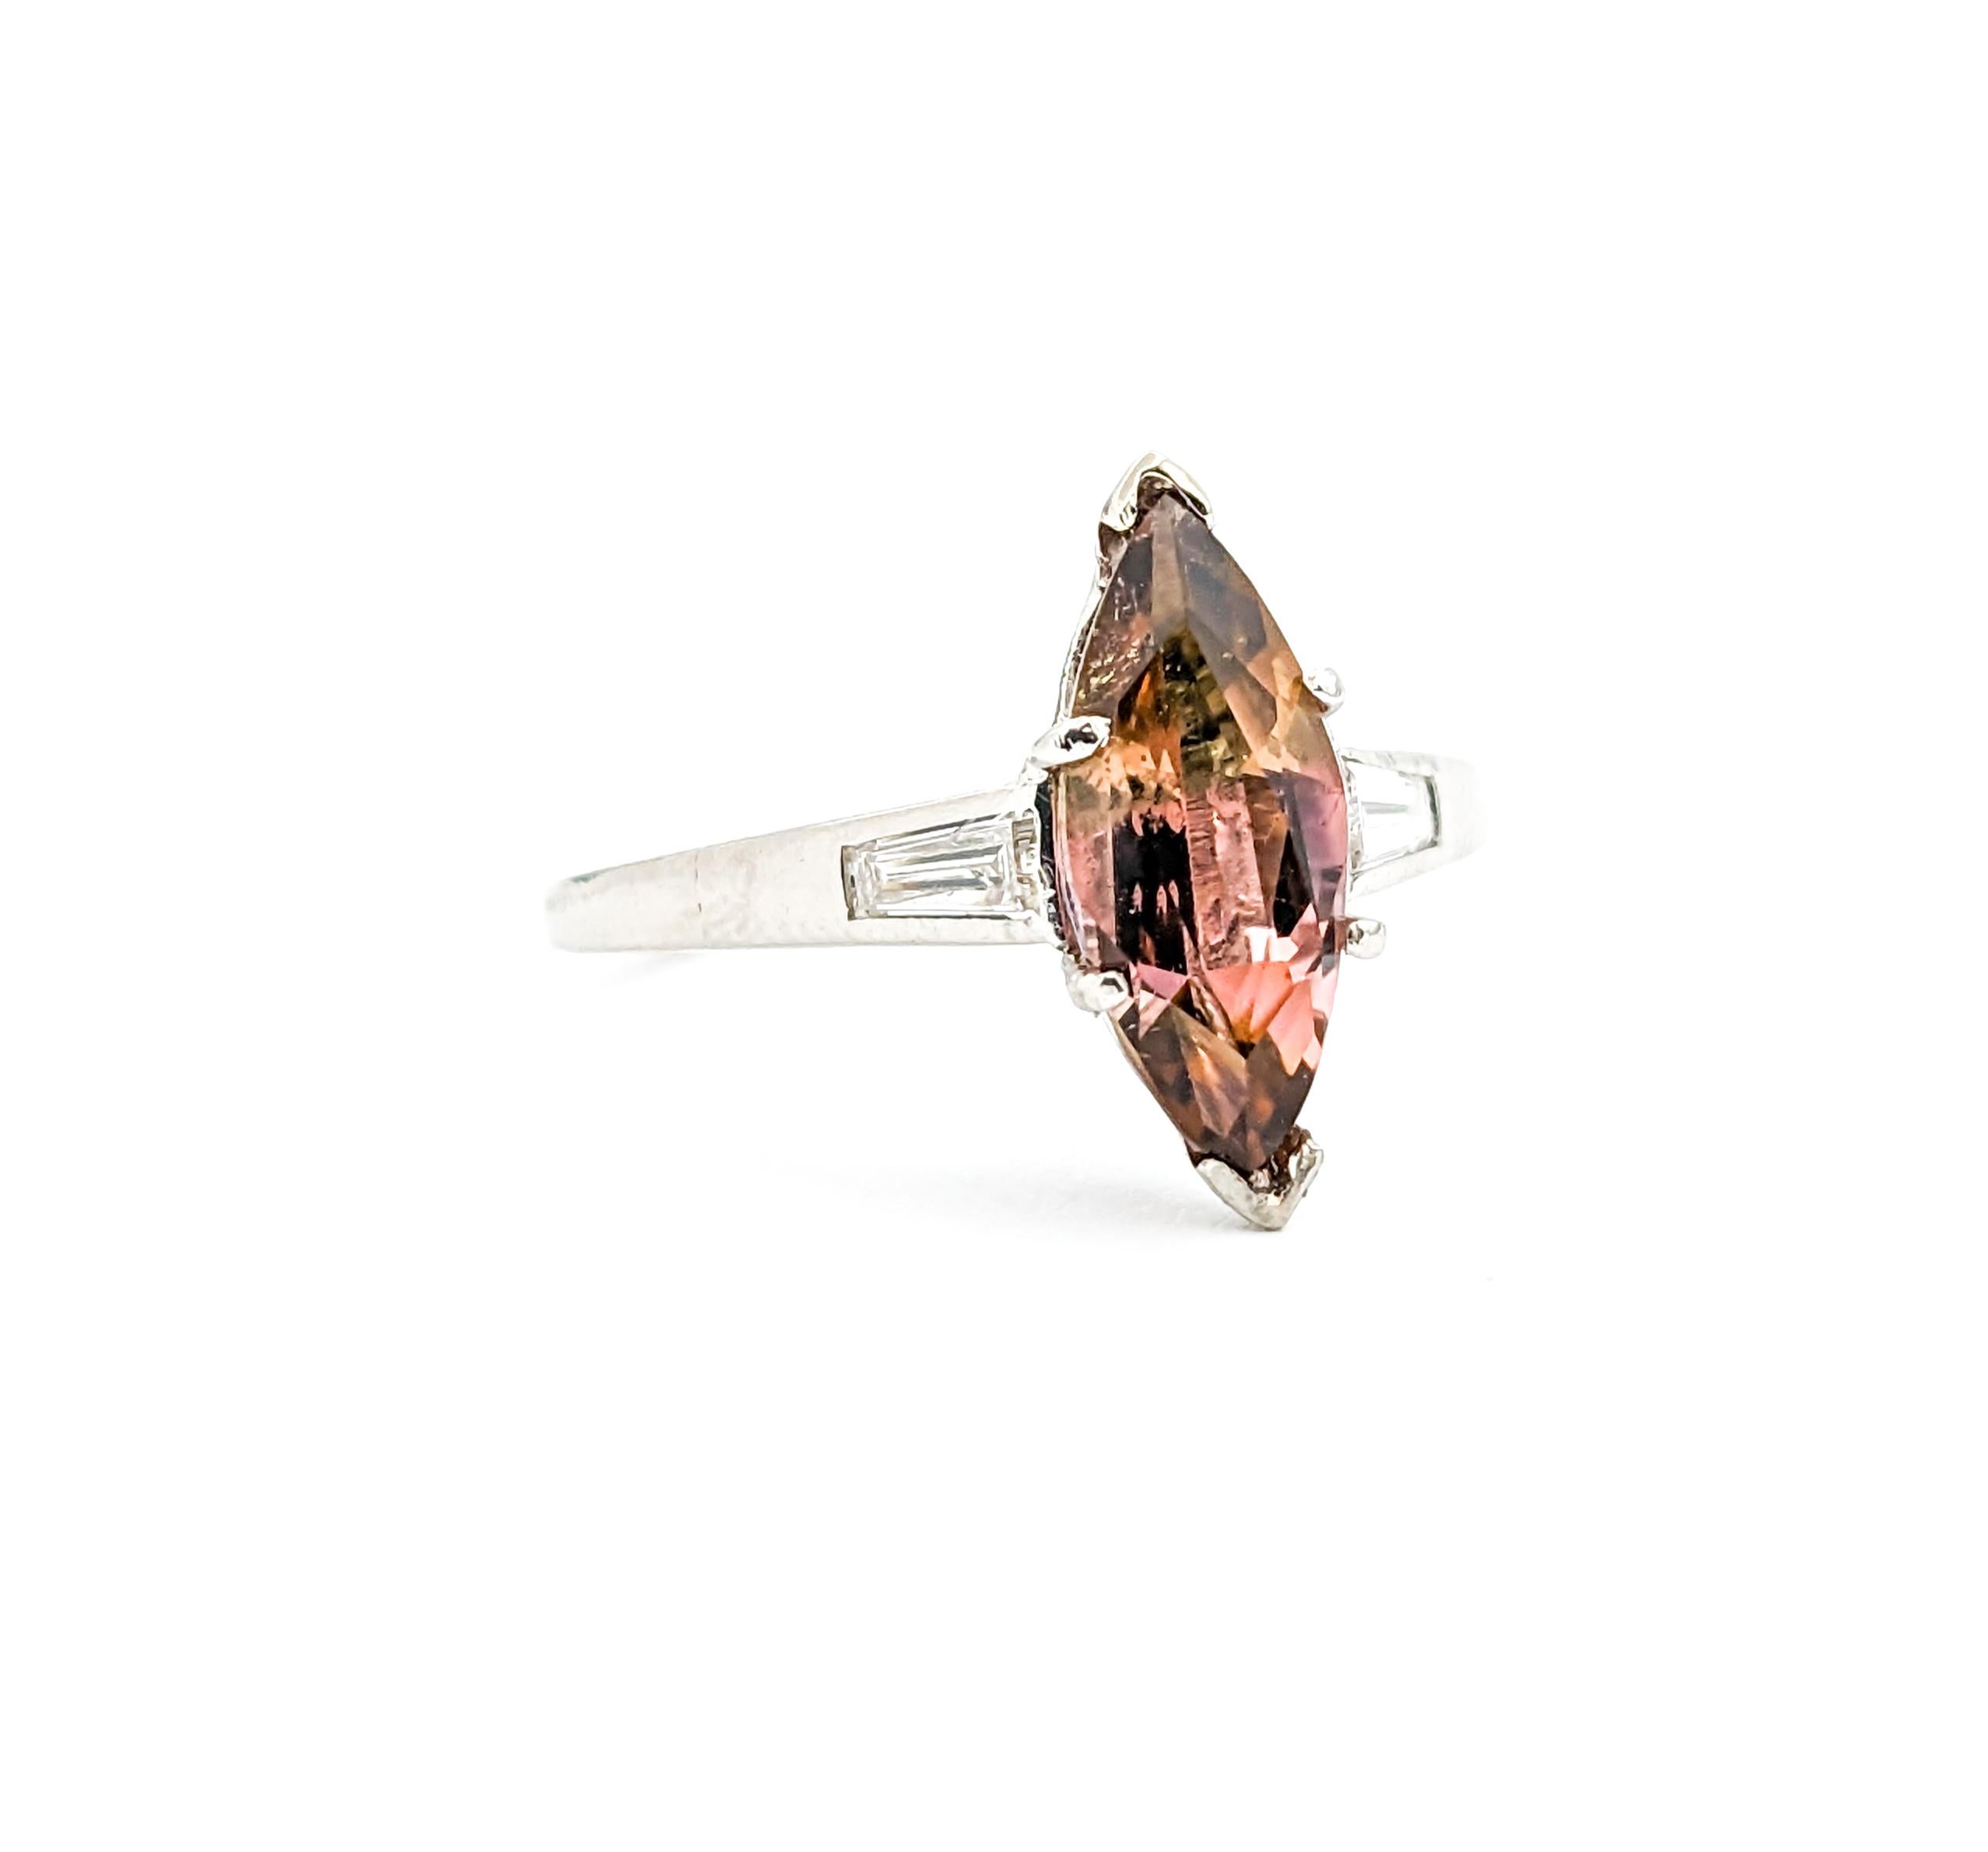 1.52ct Bi-Color Tourmaline Marquise & Diamond Ring In Platinum

Introducing this beautiful Bi-Color Tourmaline Ring, expertly crafted in 950 platinum. The centerpiece of the ring is a captivating 1.52ct Bi-Color Tourmaline, lending a unique and